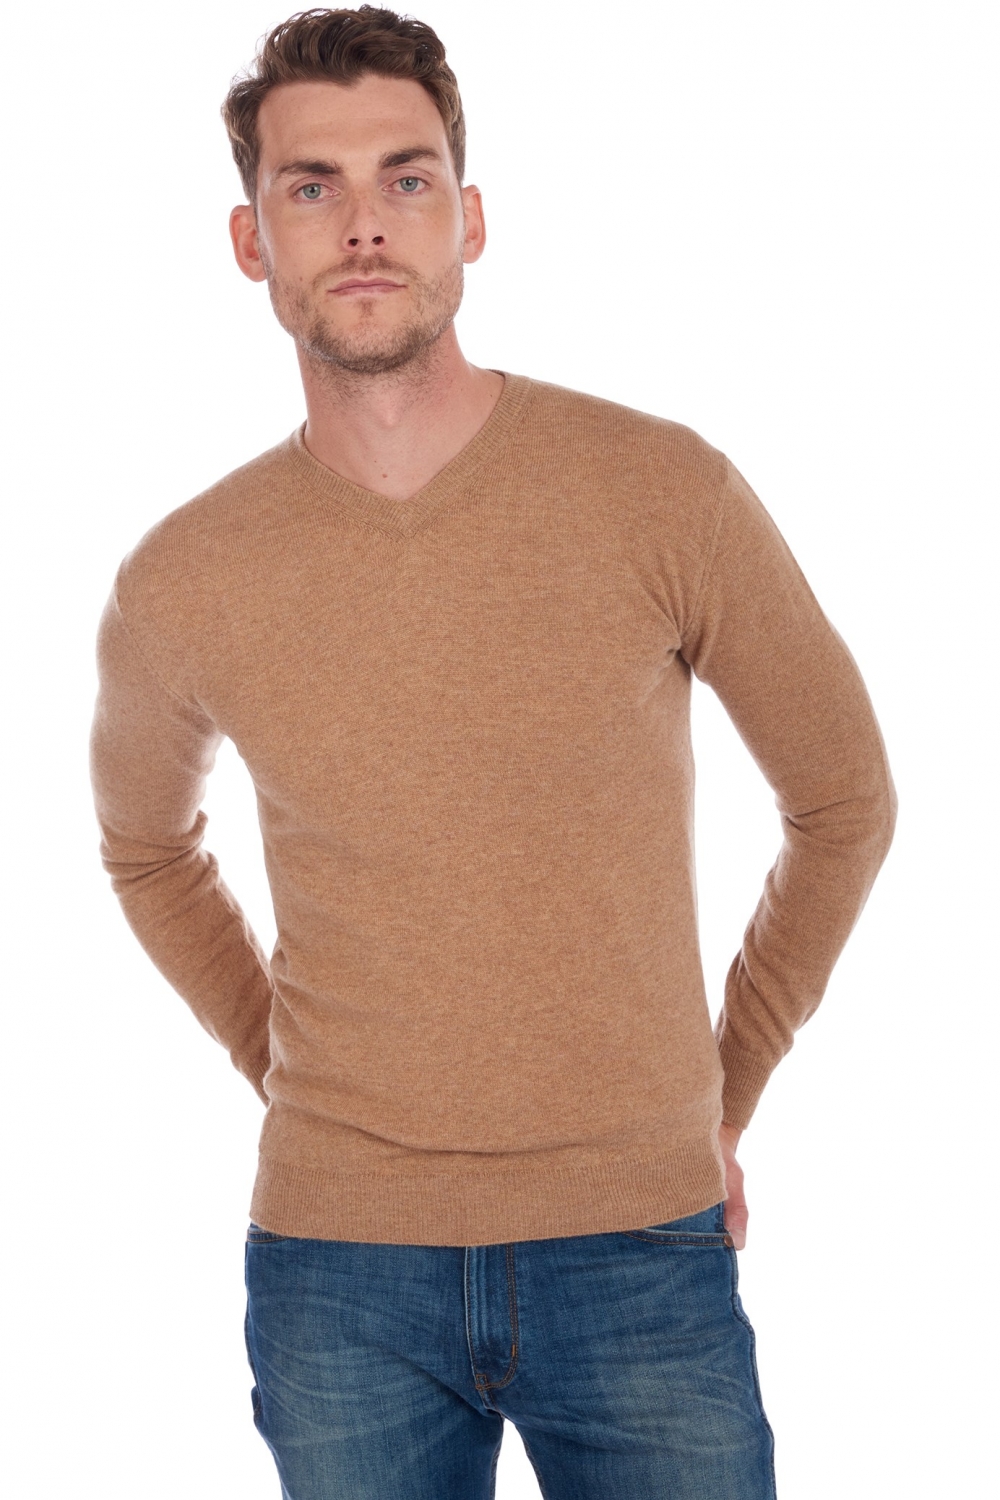 Cachemire pull homme col v maddox camel chine l